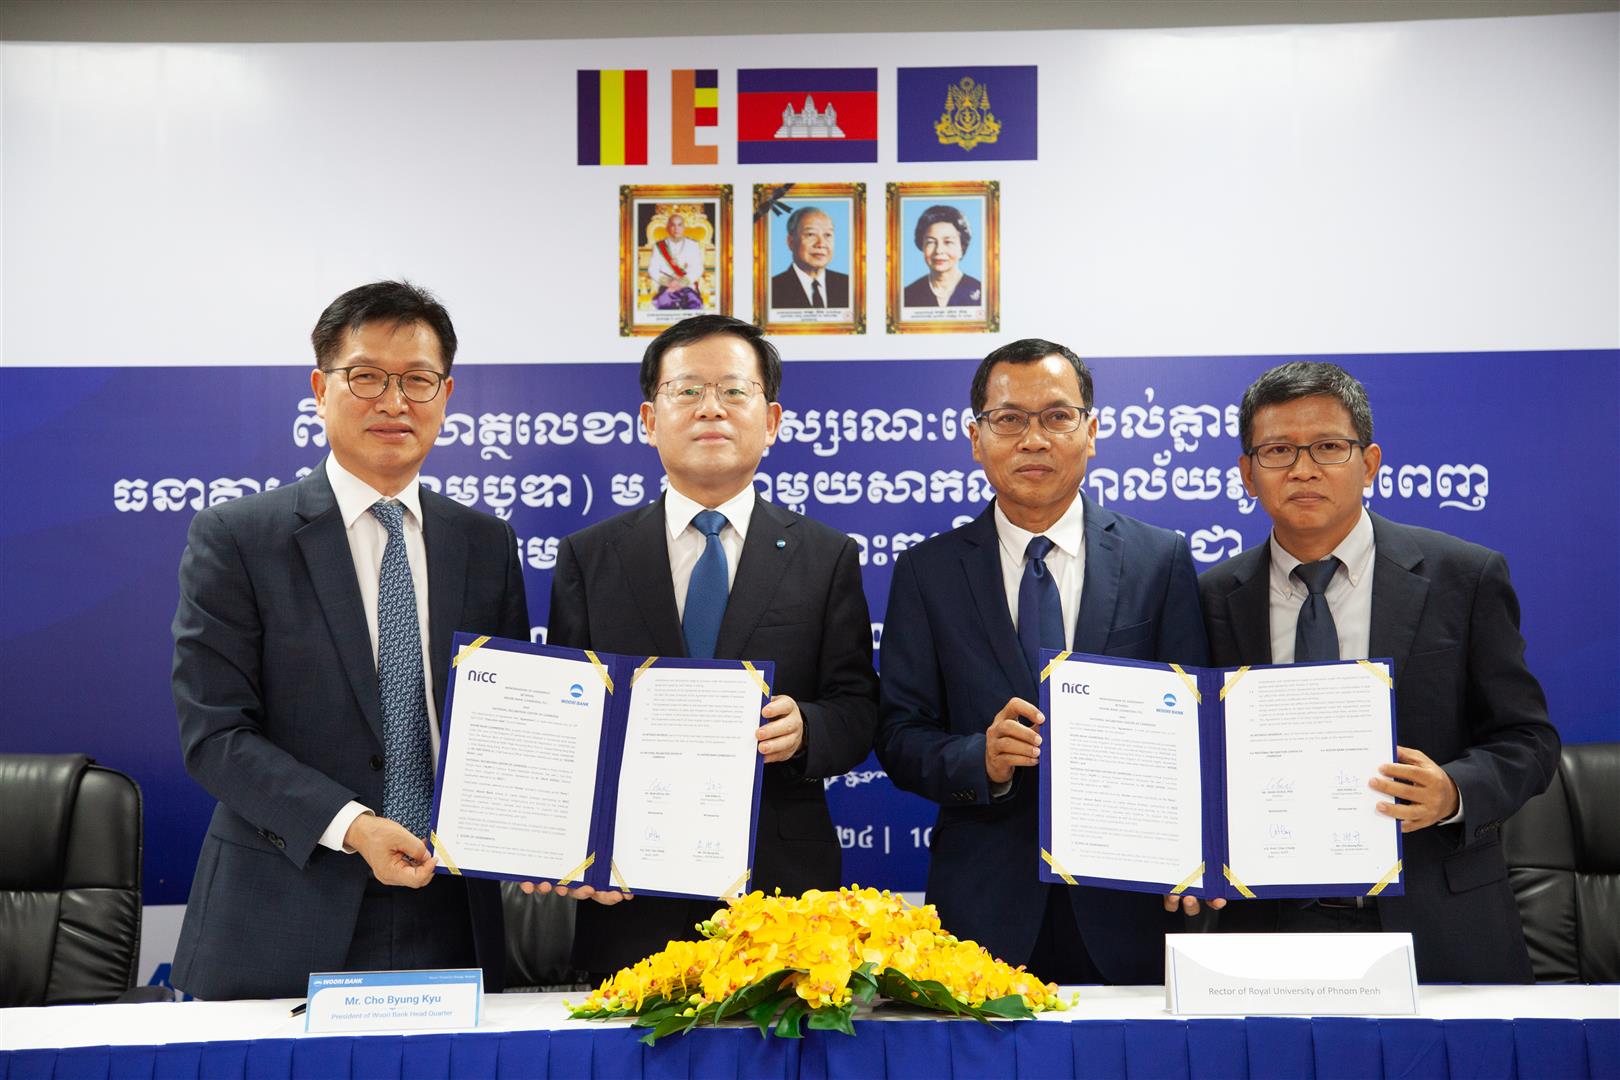 Woori Bank, NICC, and Royal University of Phnom Penh Join Forces to Boost Cambodia’s Startup Ecosystem